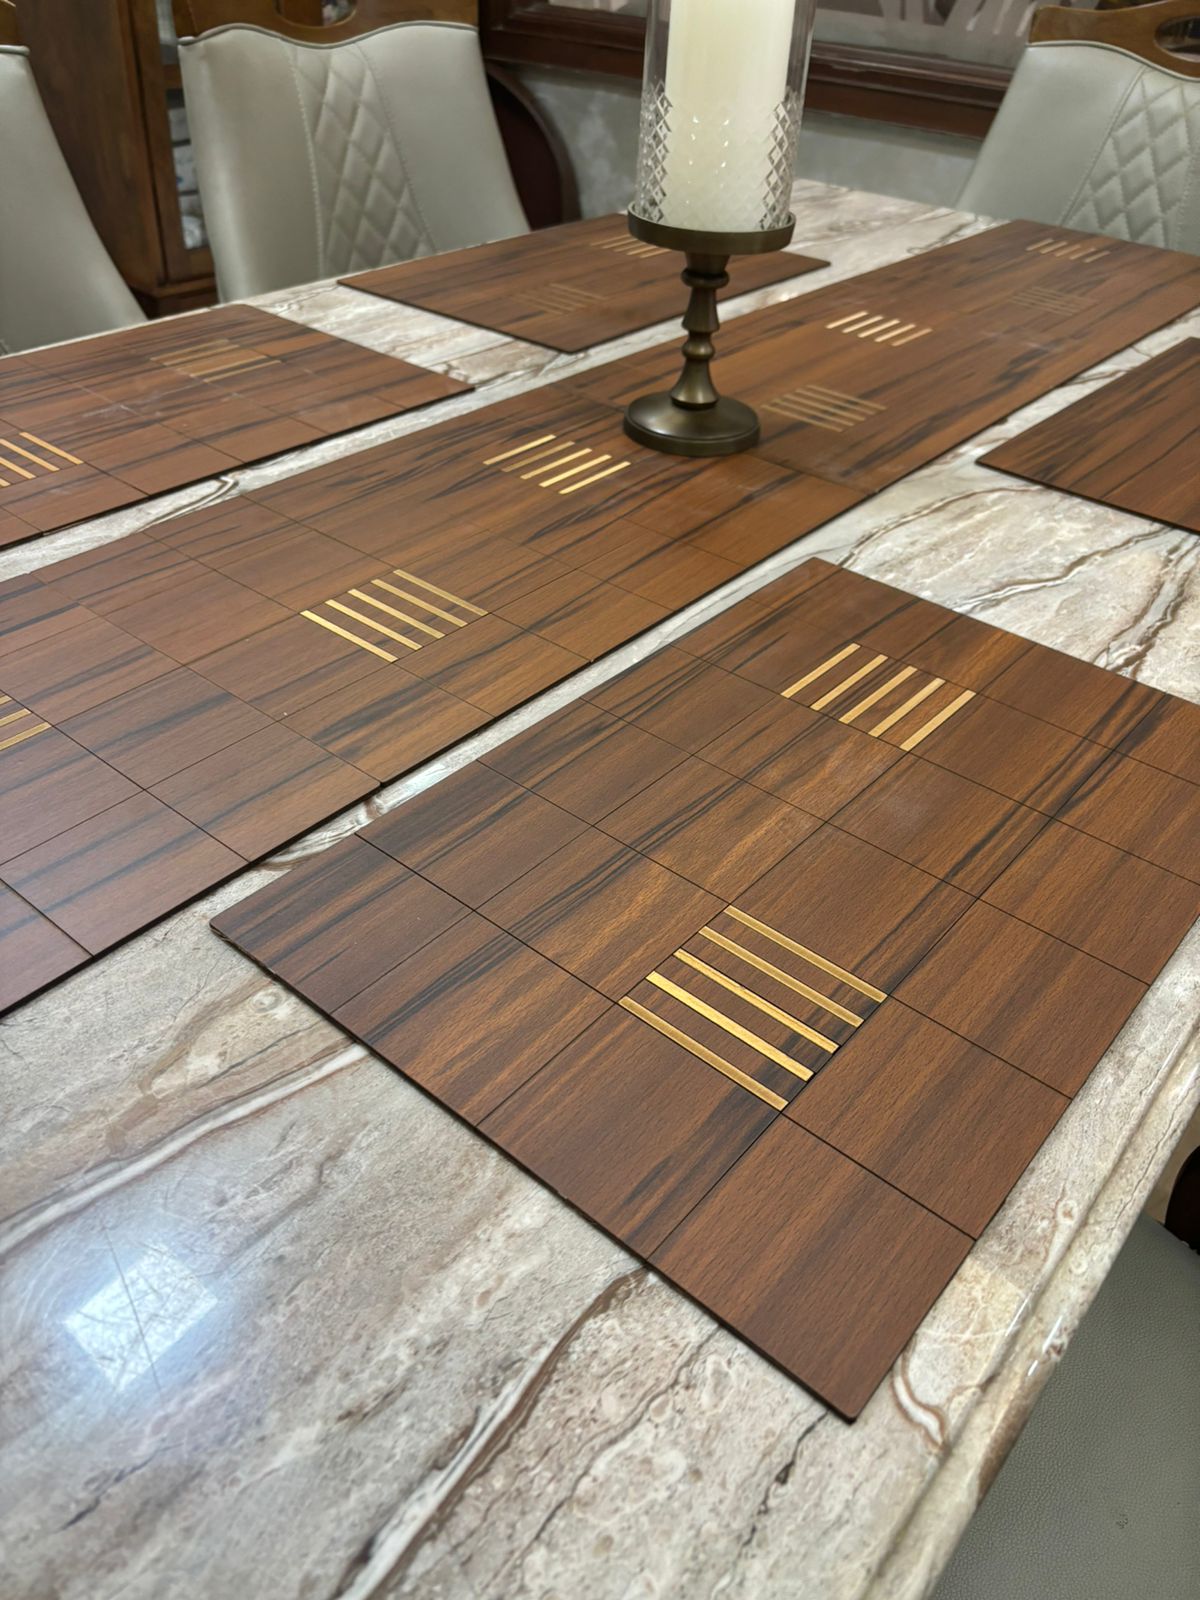 Wooden Table Mats With Runner For Dining Kitchen Restaurant Table, Foldable, Set of 7,  12x18 Inch